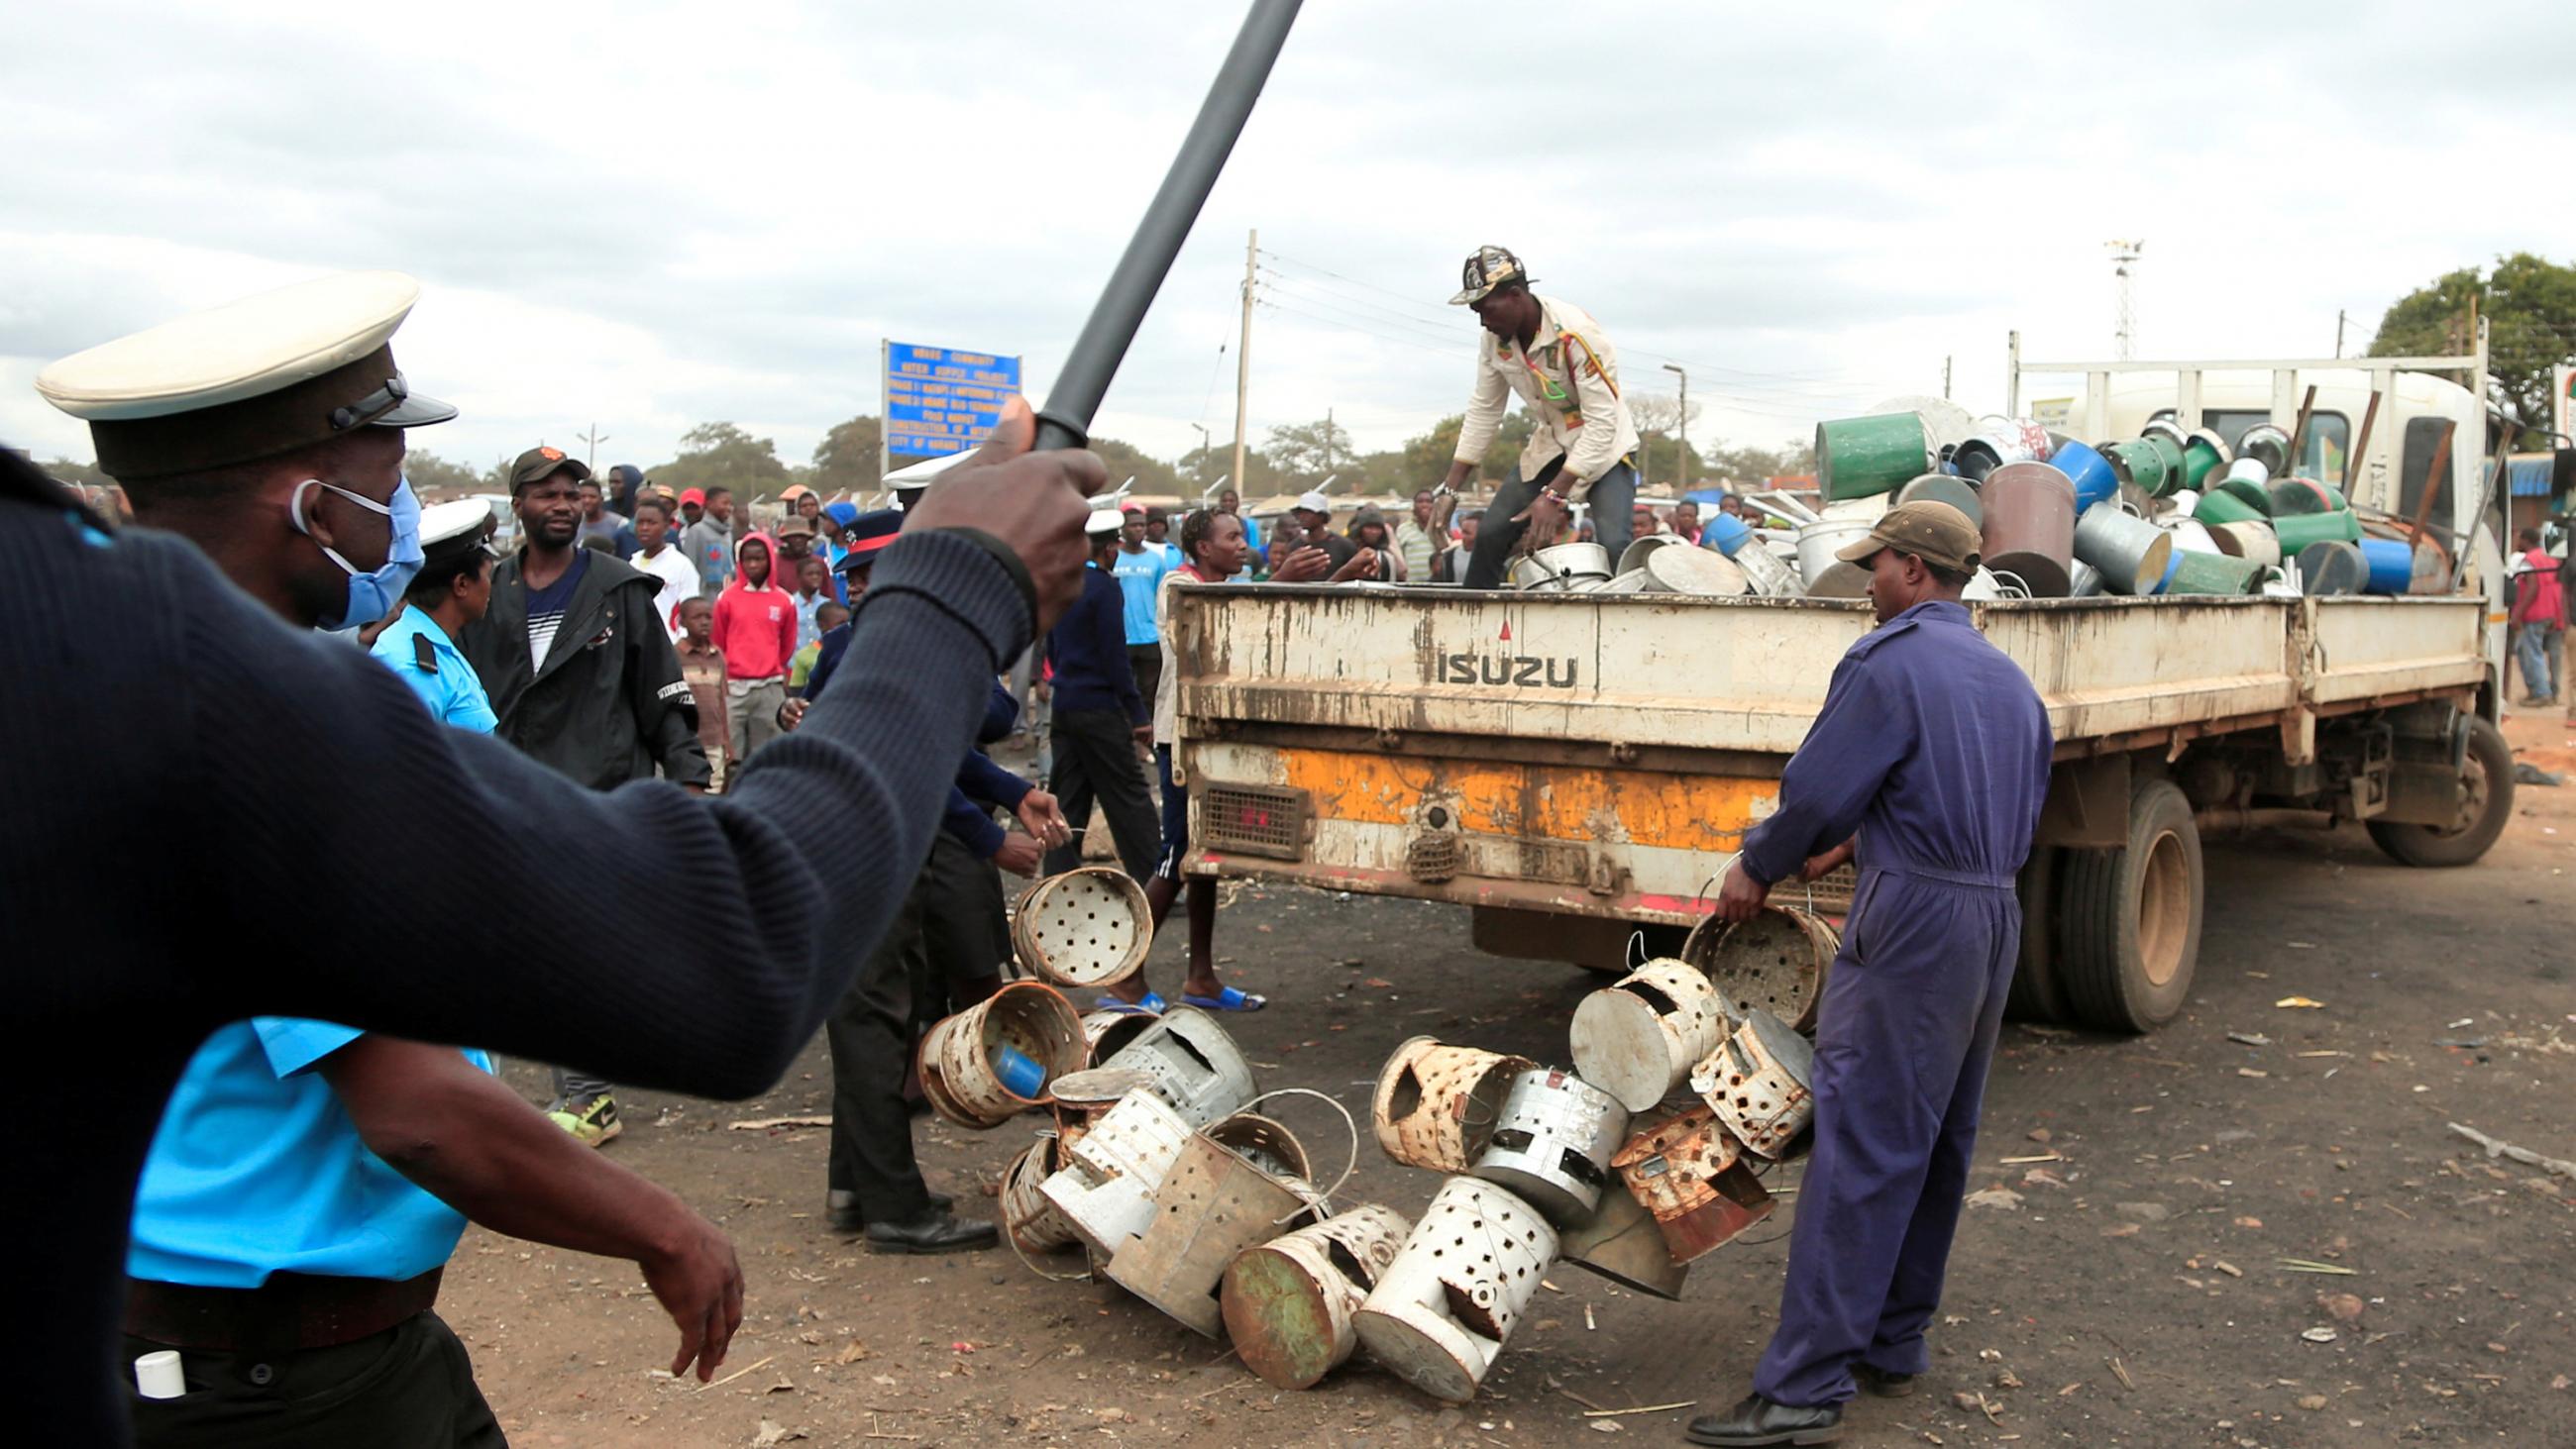 The photo shows a chaotic scene with a police officer waving a baton and people dragging crates and barrels onto a truck.  